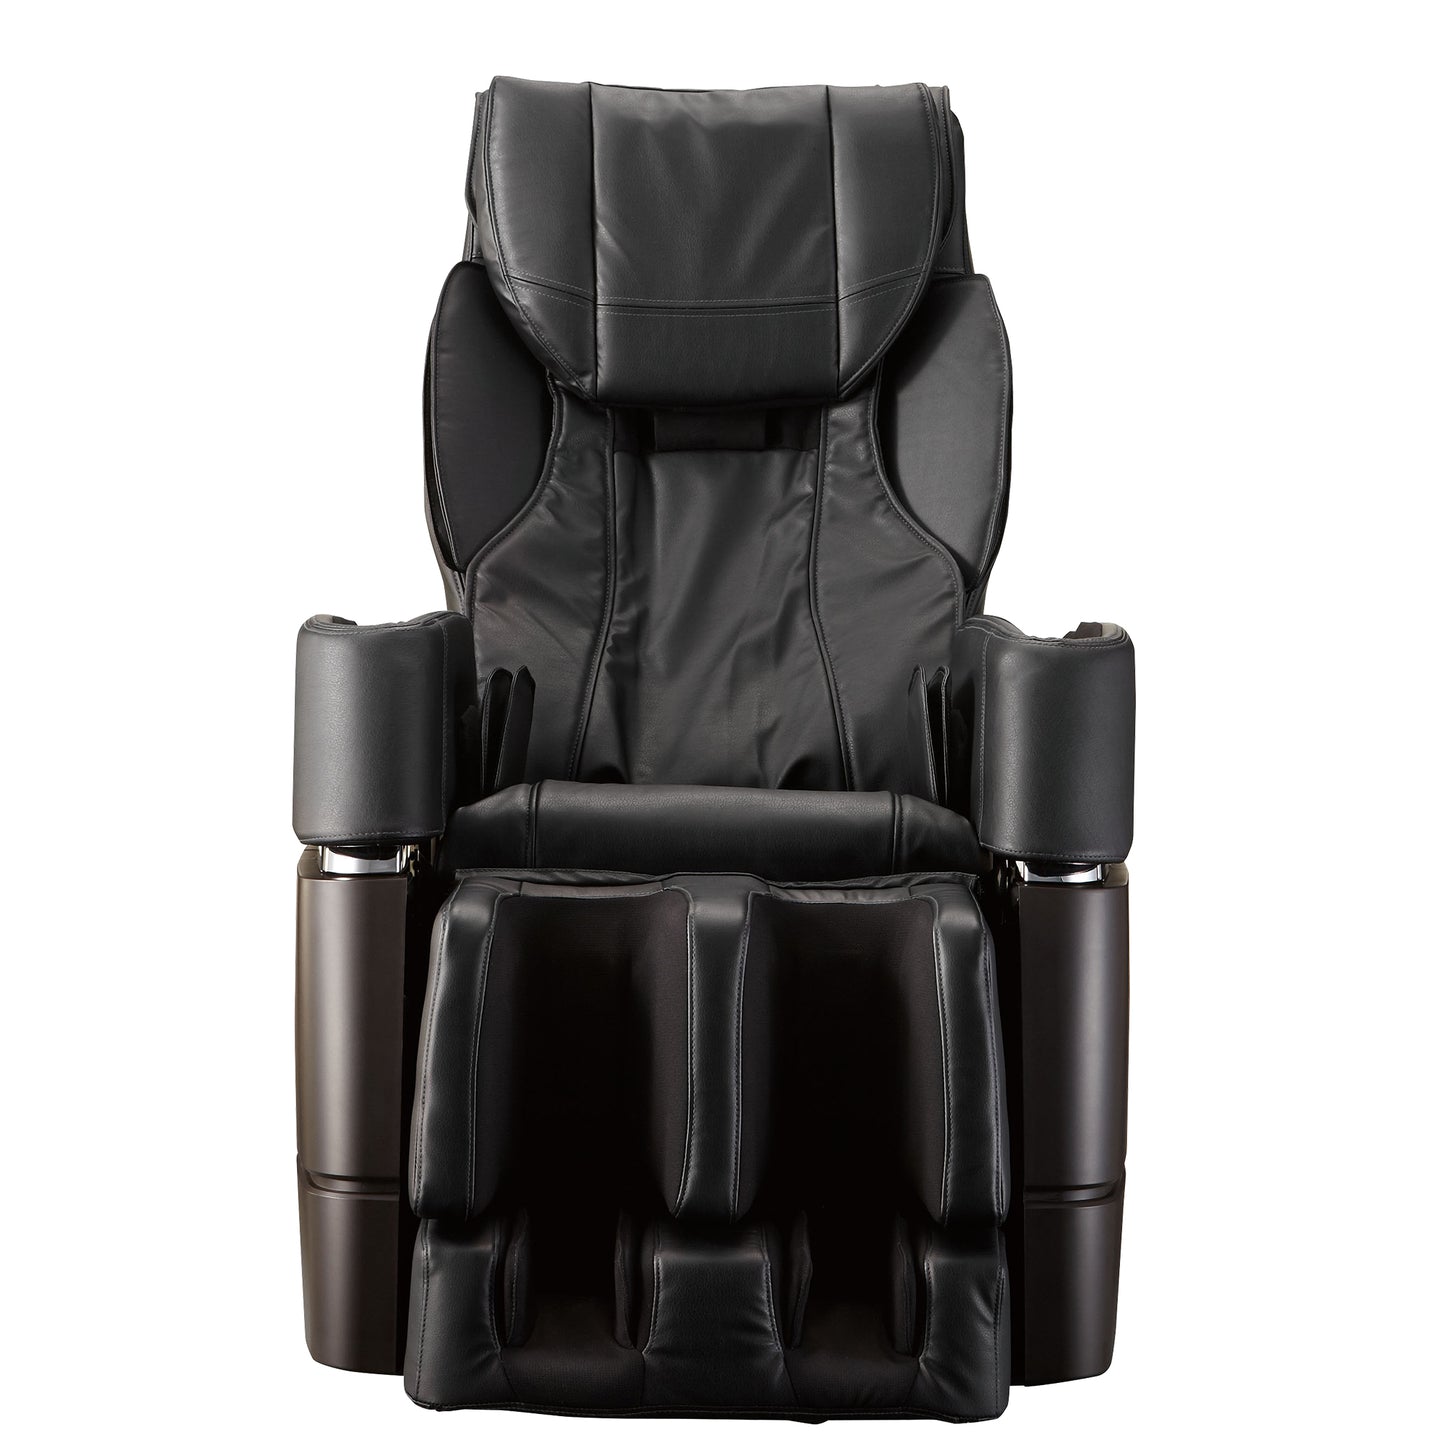 Synca JP-970  - Made in Japan 4D Massage Chair w/ Touchscreen